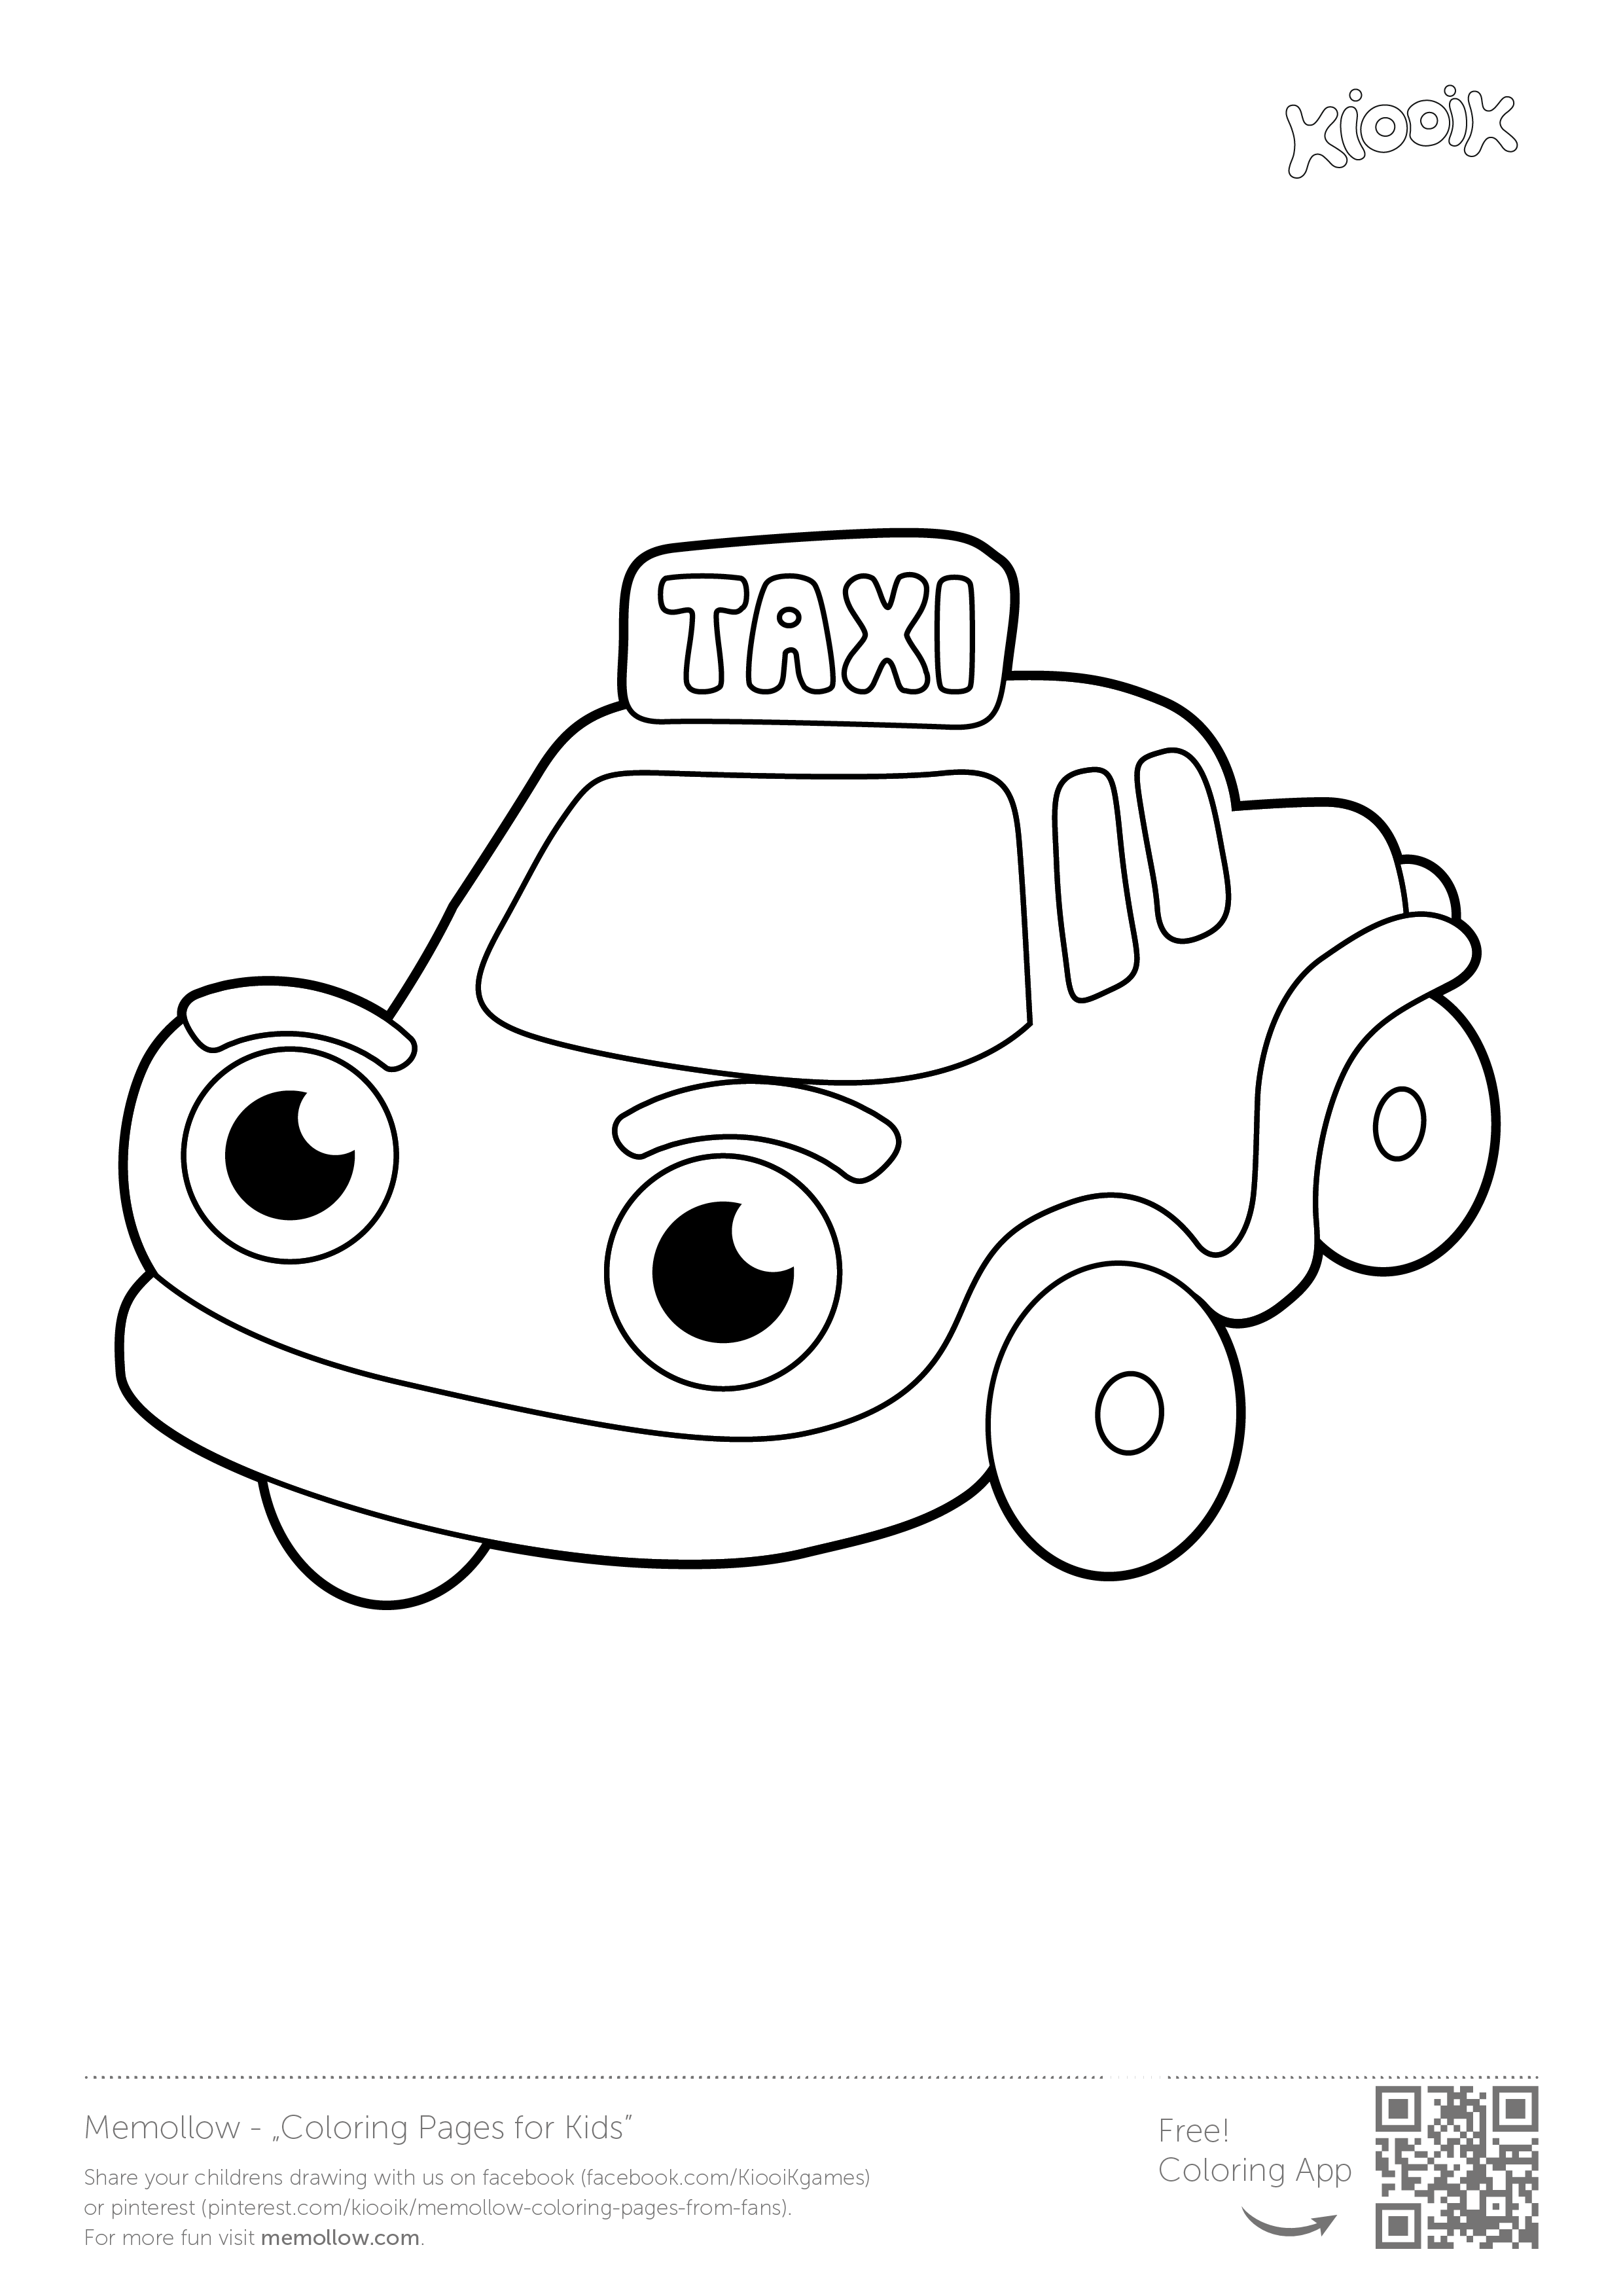 Taxi #memollow to print #coloring pages for #kids printables ...